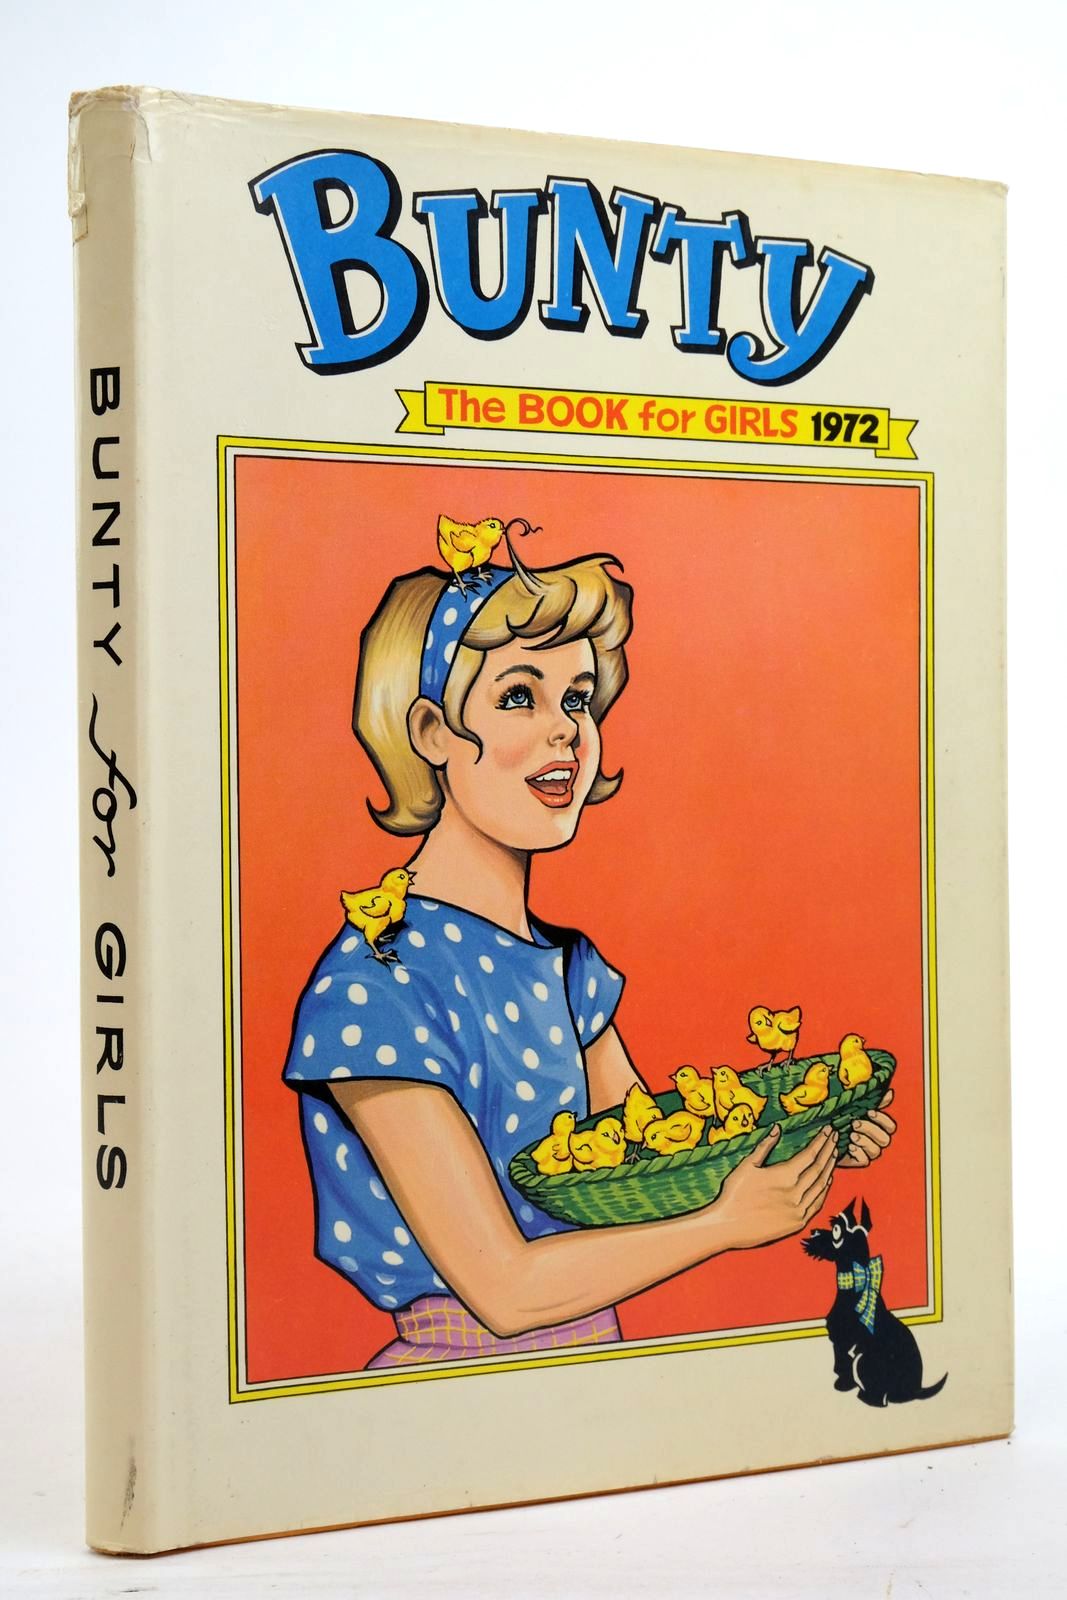 Photo of BUNTY FOR GIRLS 1972 published by D.C. Thomson &amp; Co Ltd. (STOCK CODE: 2138027)  for sale by Stella & Rose's Books